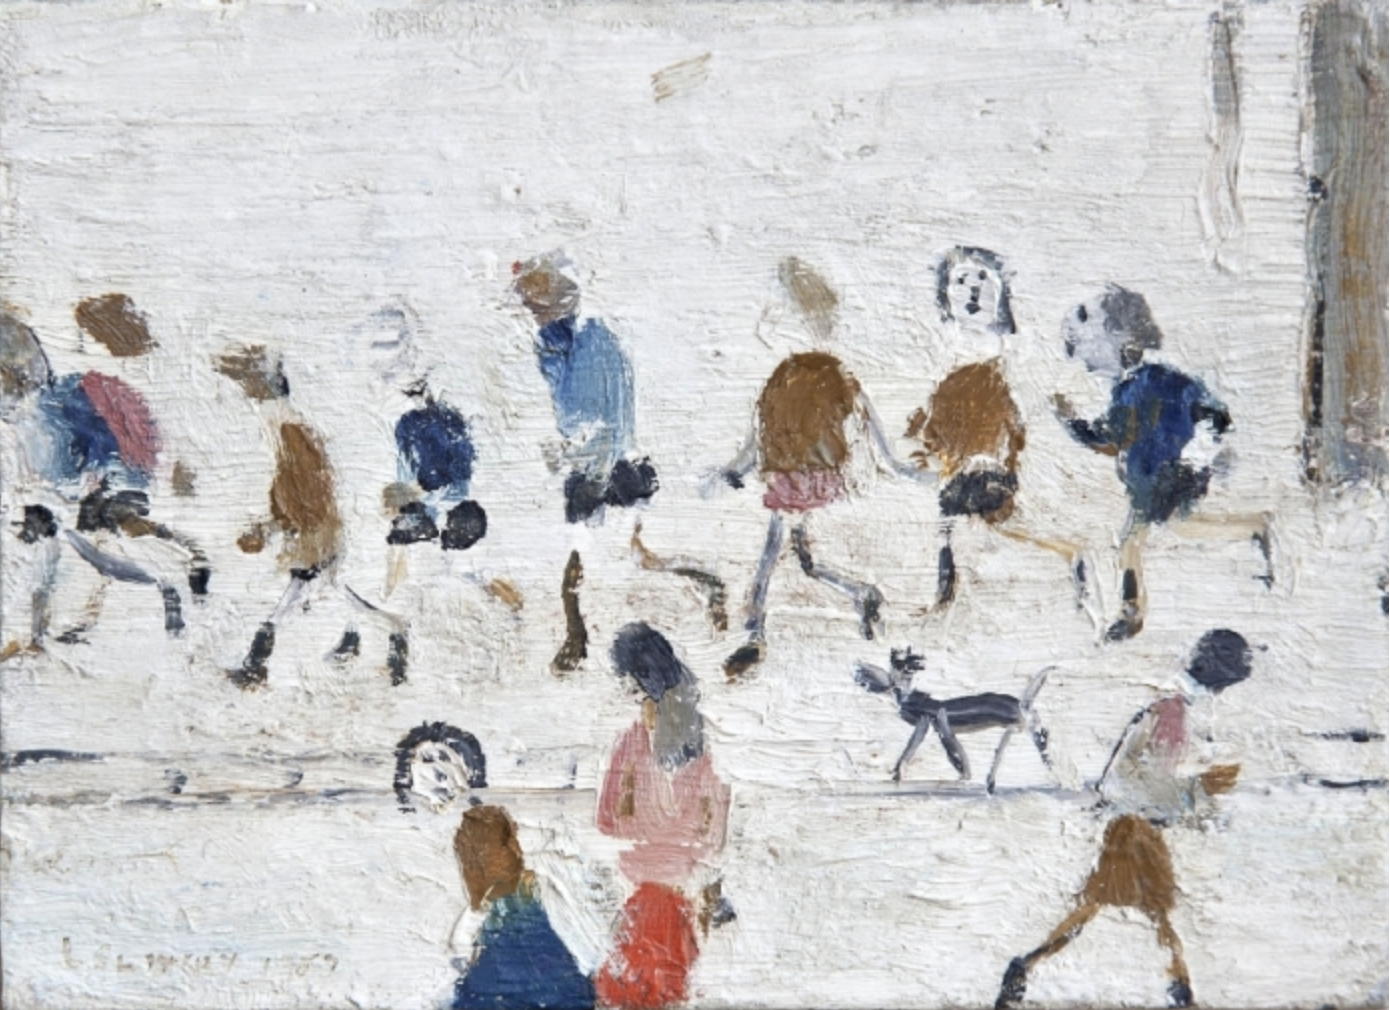 Children Playing (1959) by Laurence Stephen Lowry (1887 - 1976), English artist.